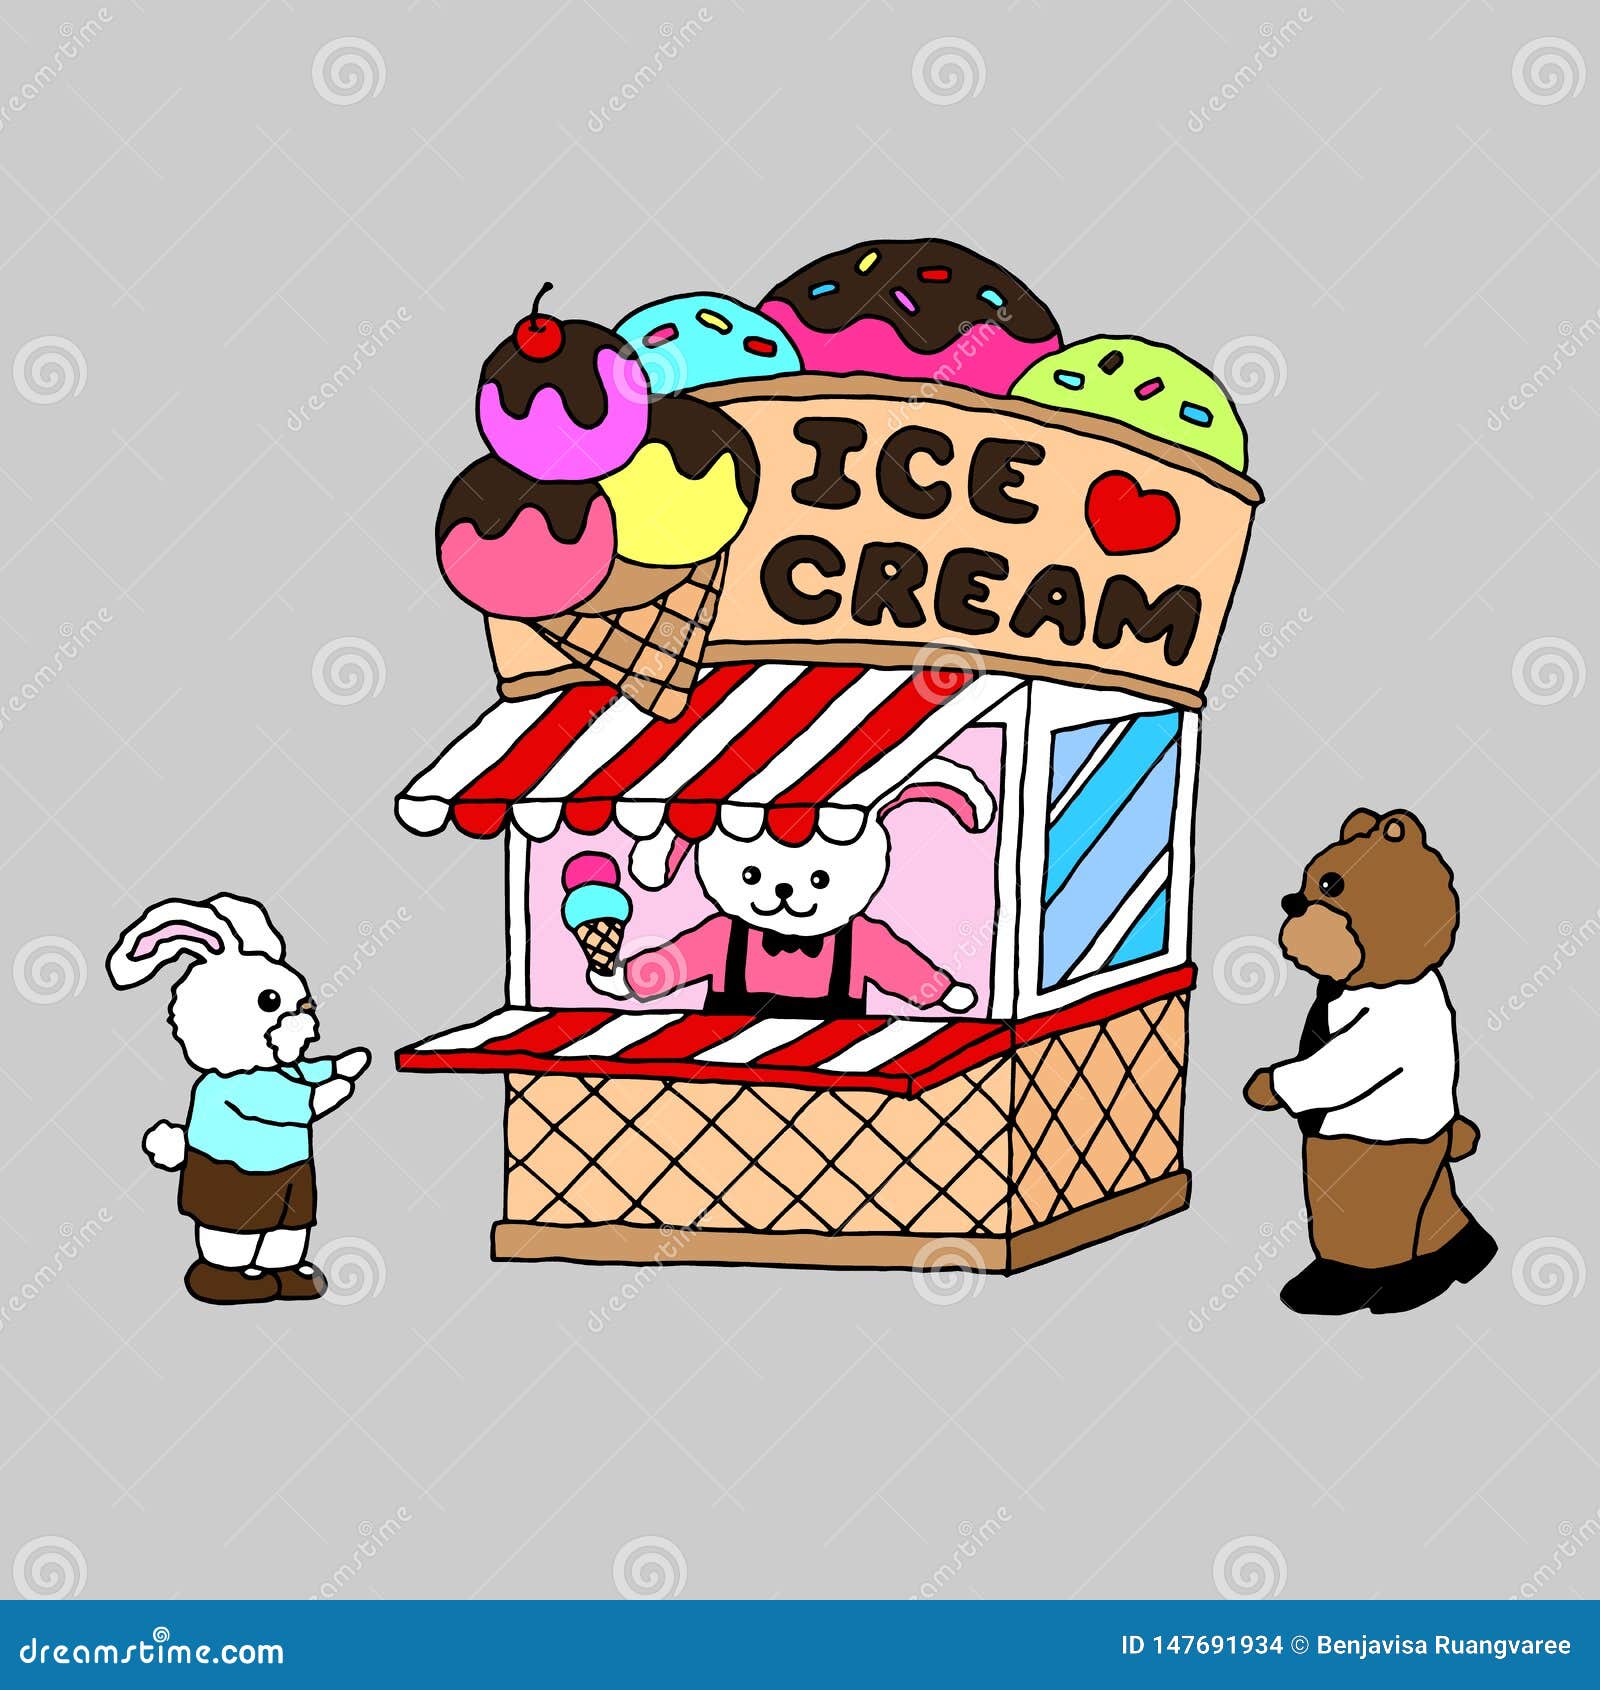 HOW TO DRAW A CUTE ICE CREAM , STEP BY STEP, DRAW Cute things - YouTube-saigonsouth.com.vn